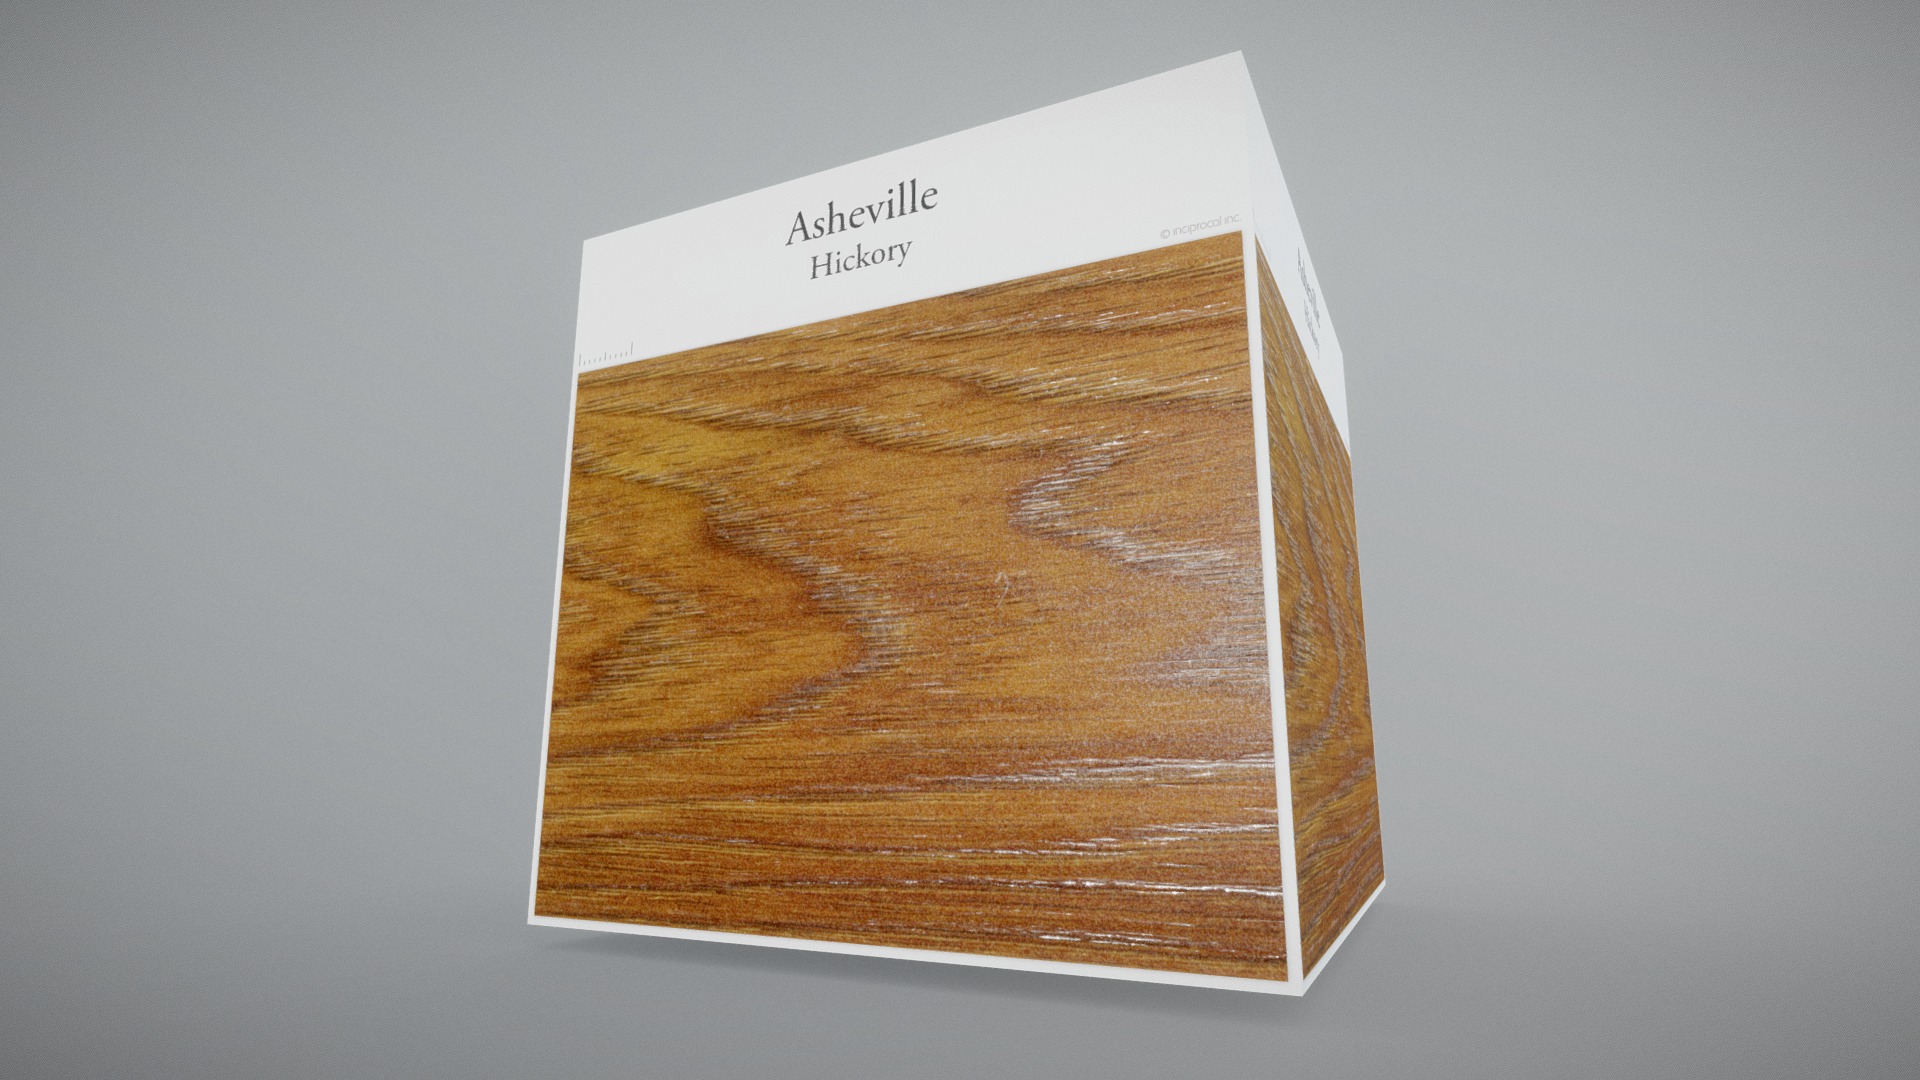 3D model Asheville (Hickory) - This is a 3D model of the Asheville (Hickory). The 3D model is about a wooden box with a label.